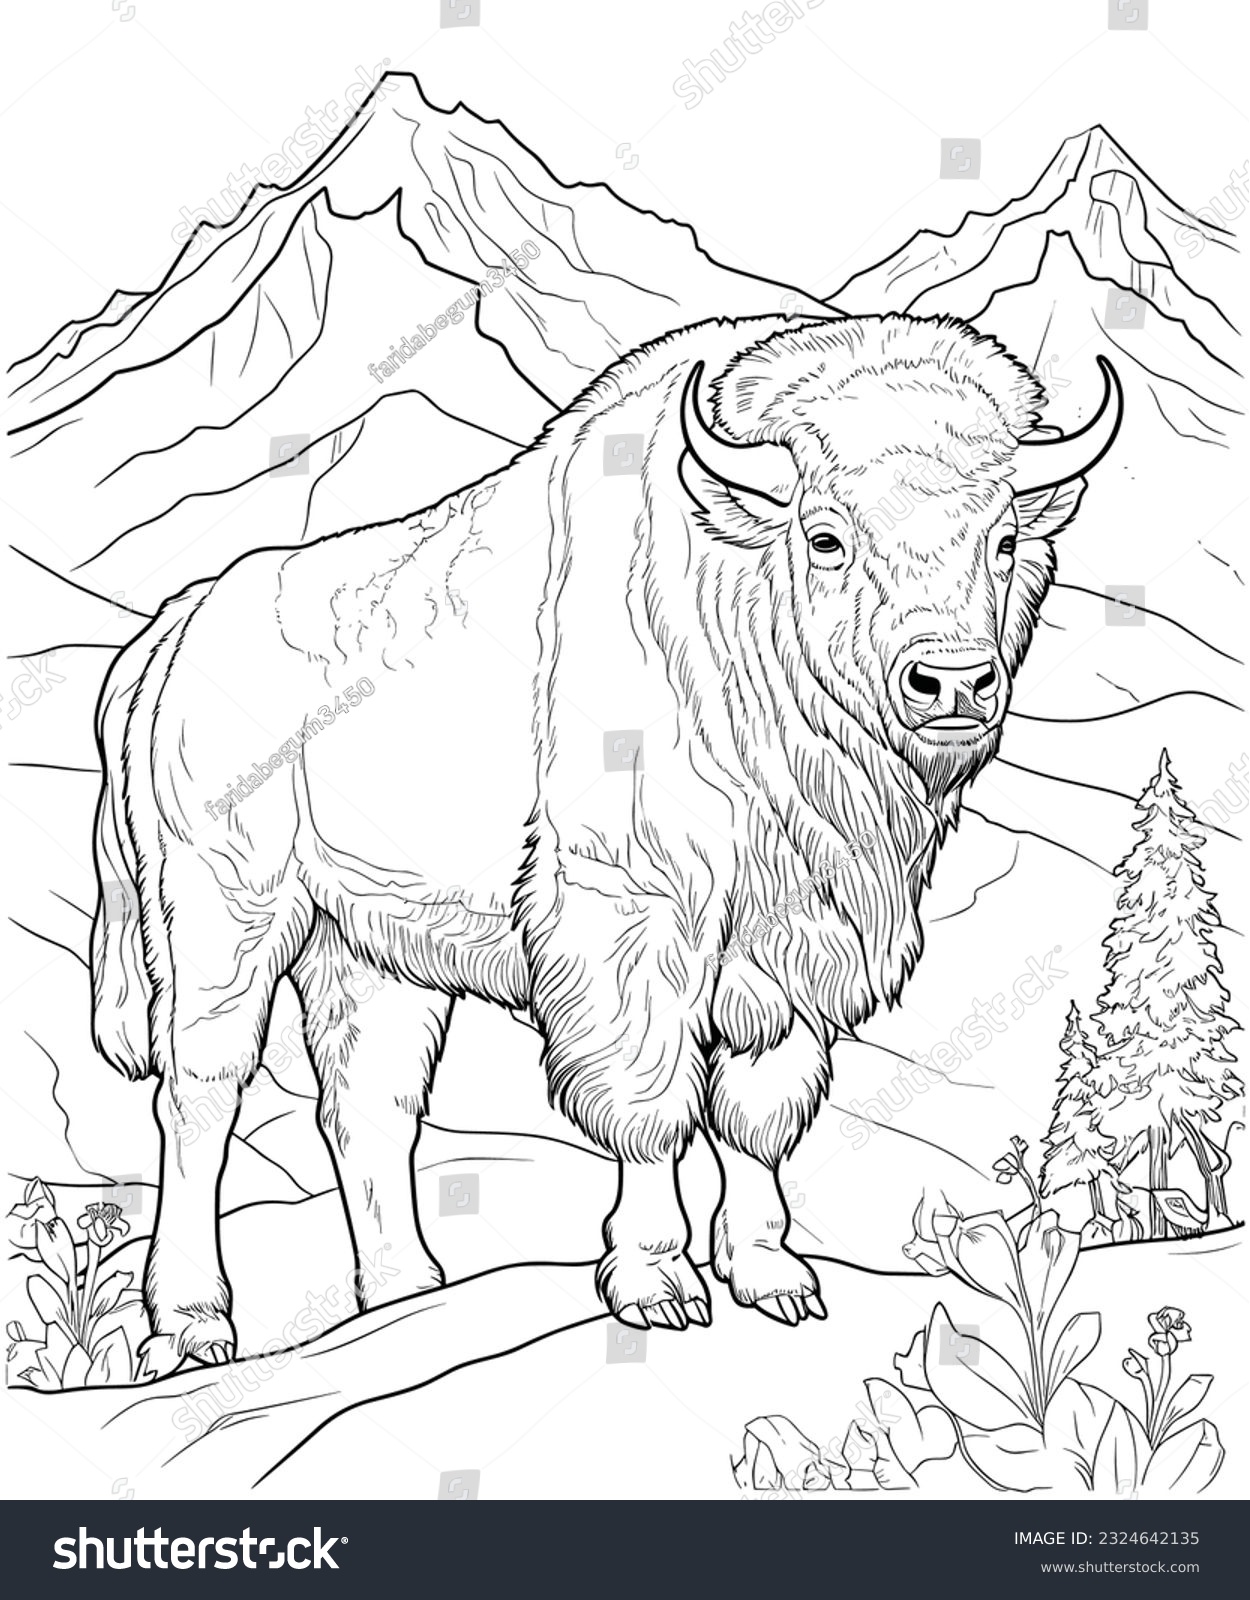 American bison wild coloring page stock vector royalty free